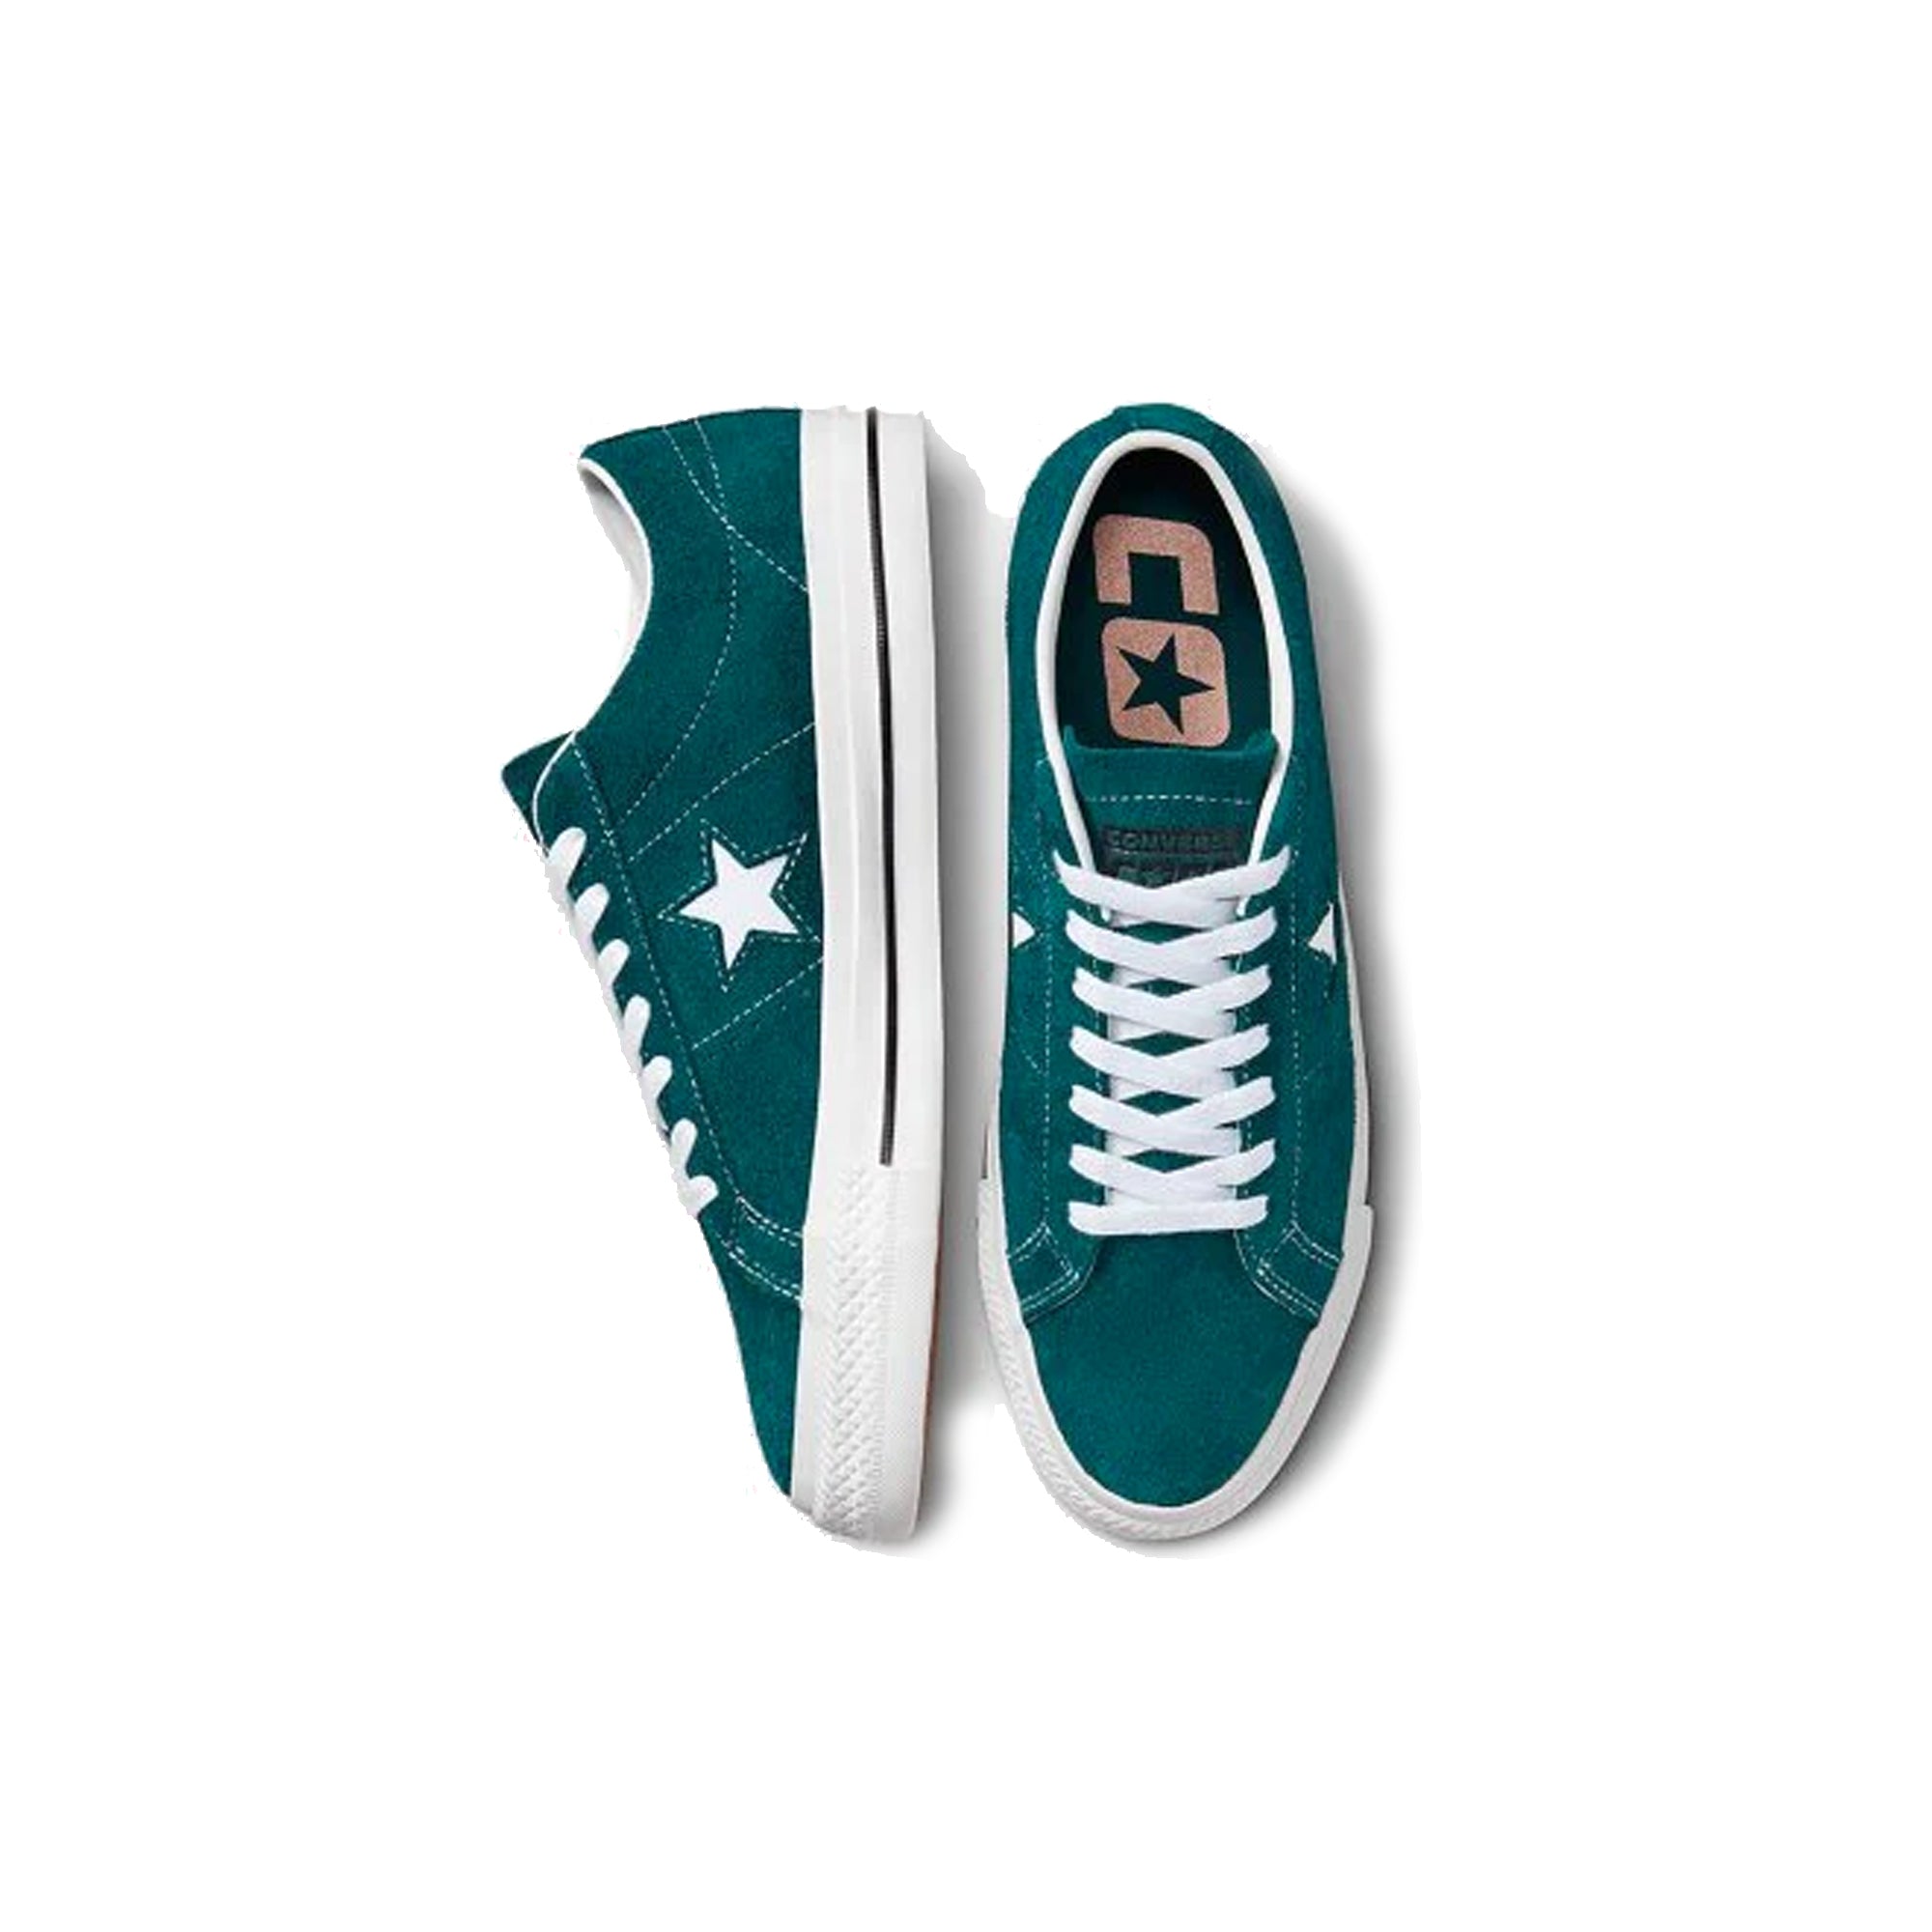 Converse One Star Pro Ox Shoes – Extra Butter